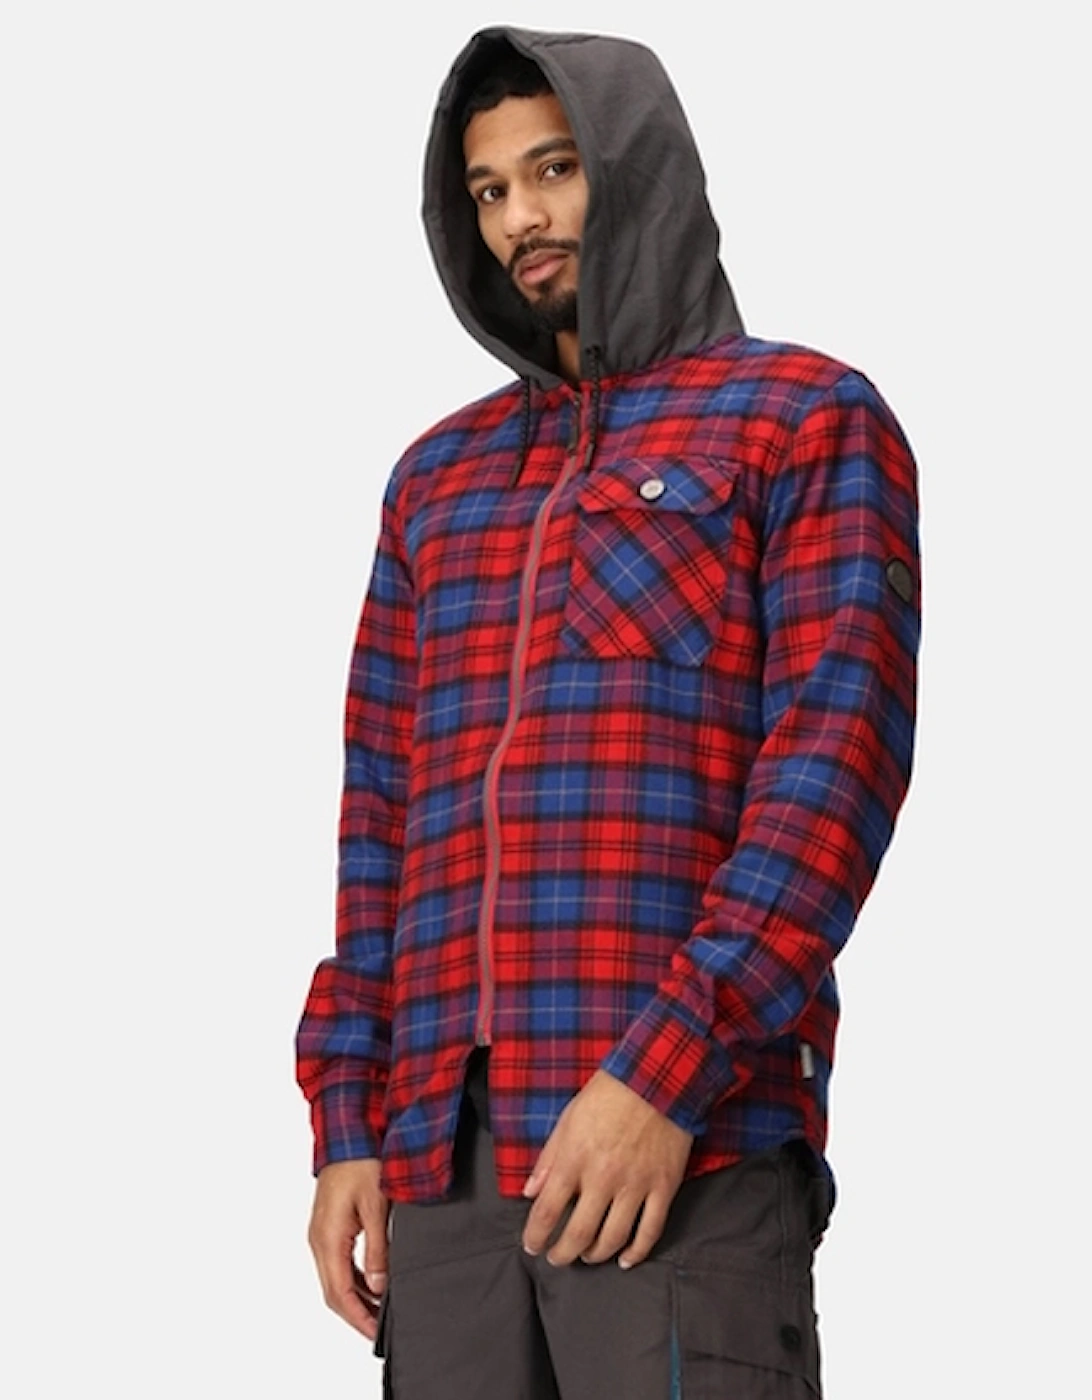 Men's Seige Hooded Shirt Jacket Classic Red Check